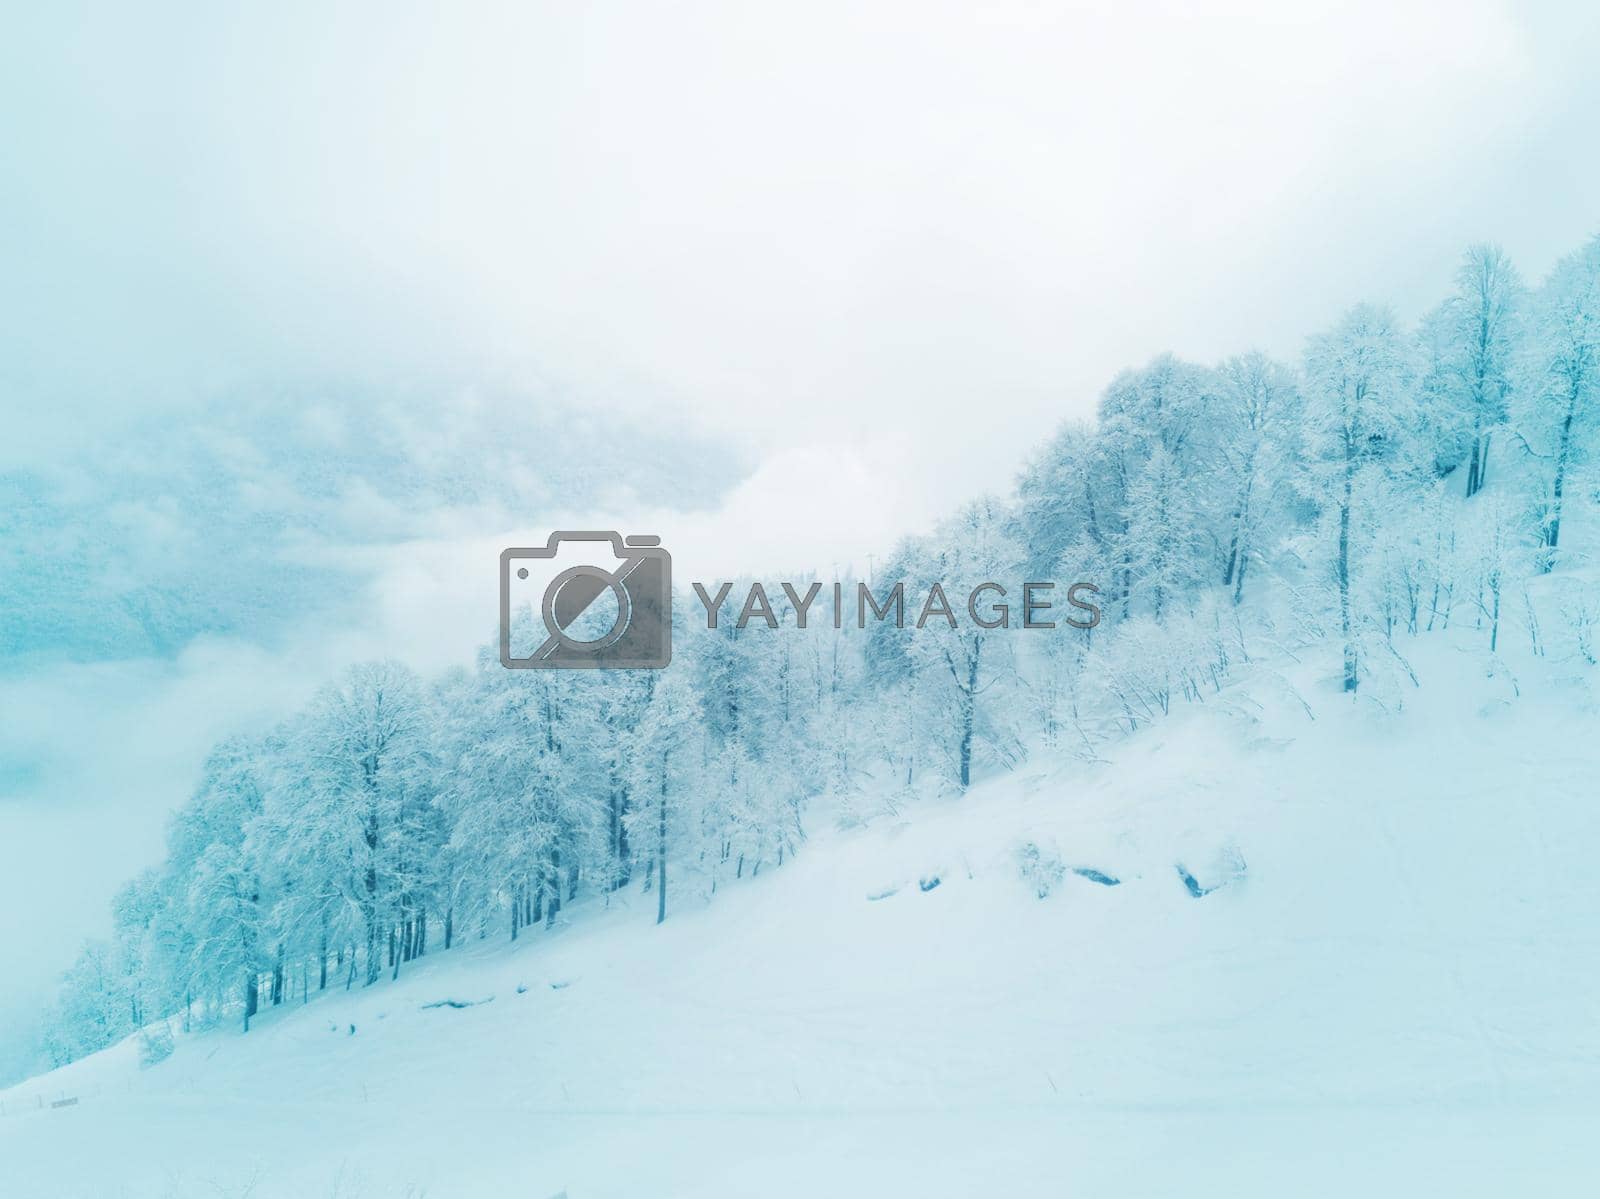 Royalty free image of Mountain winter slope by Yellowj